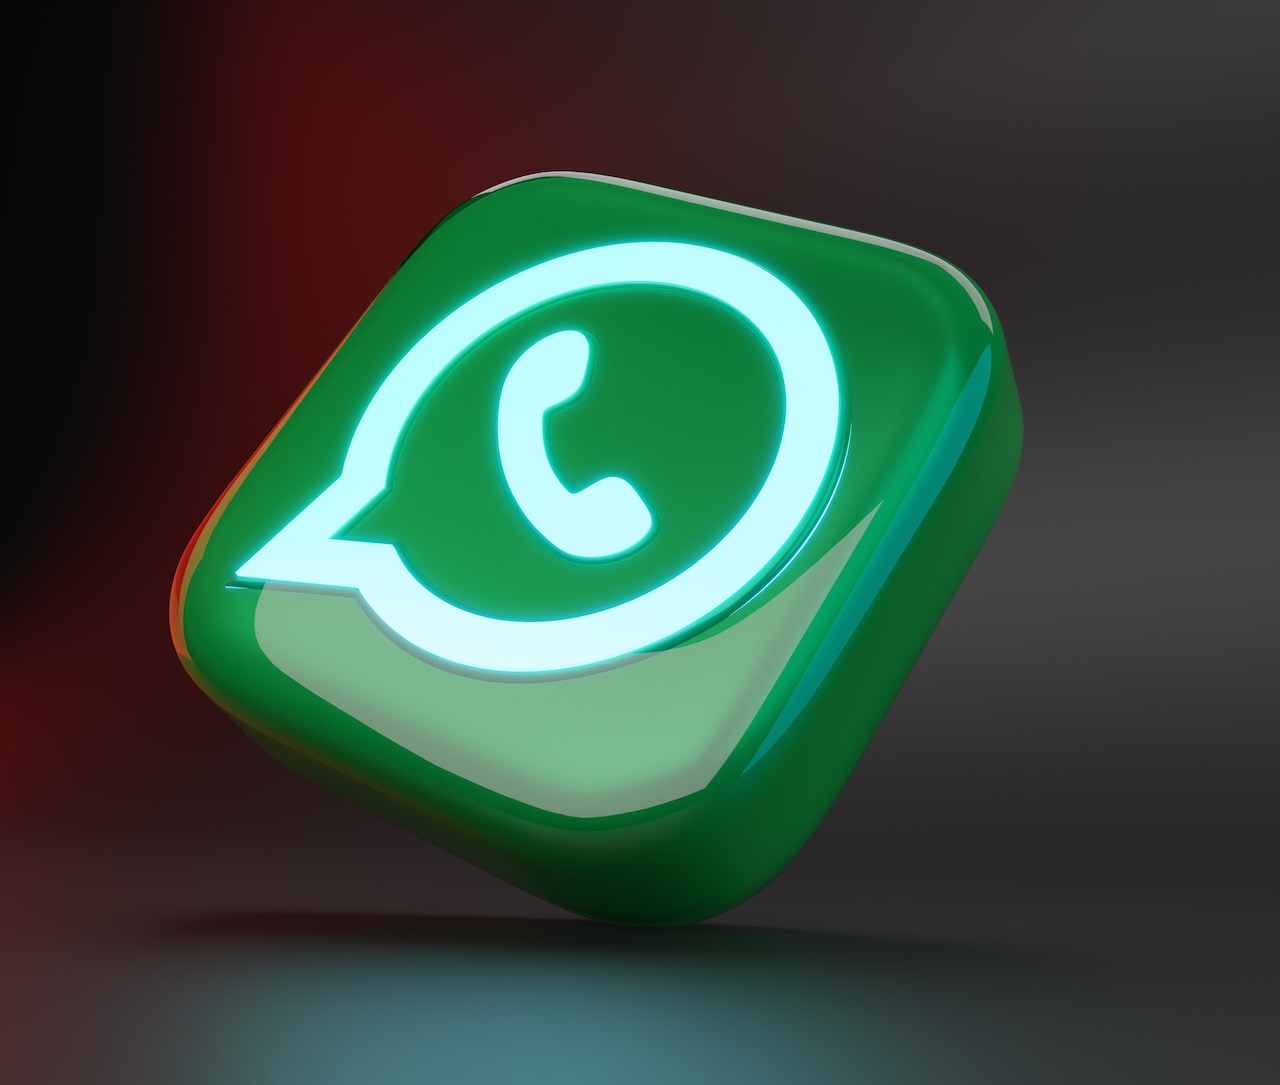 New WhatsApp function coming soon: delete sent messages